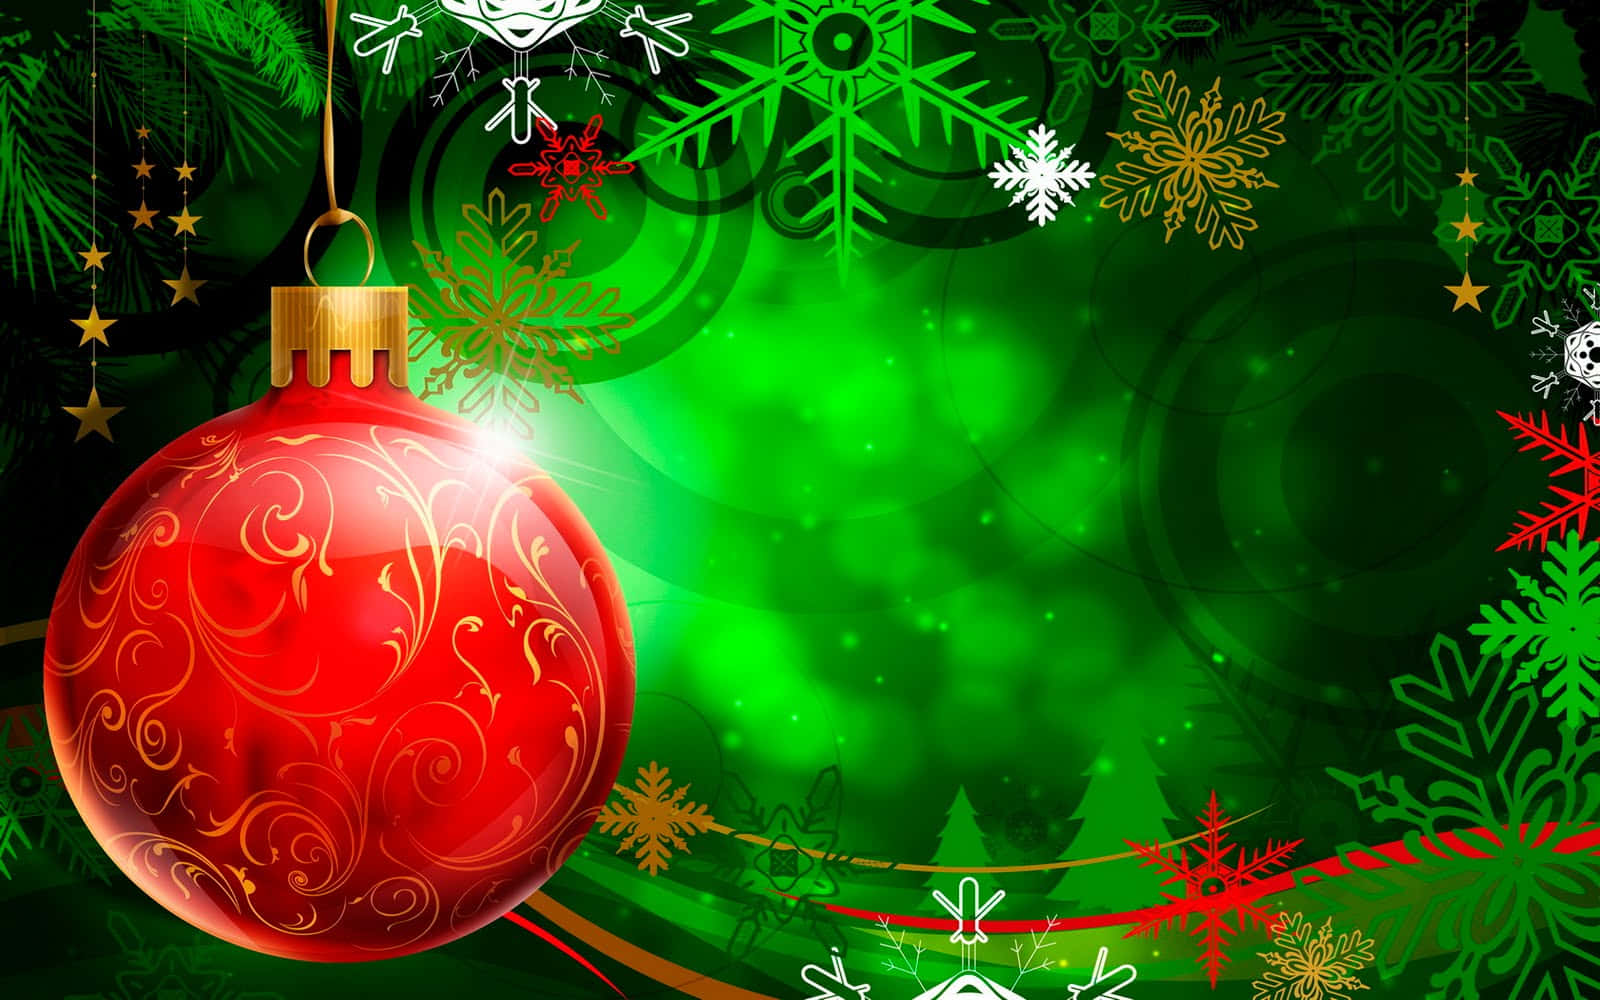 A holiday-inspired Christmas themed Powerpoint background